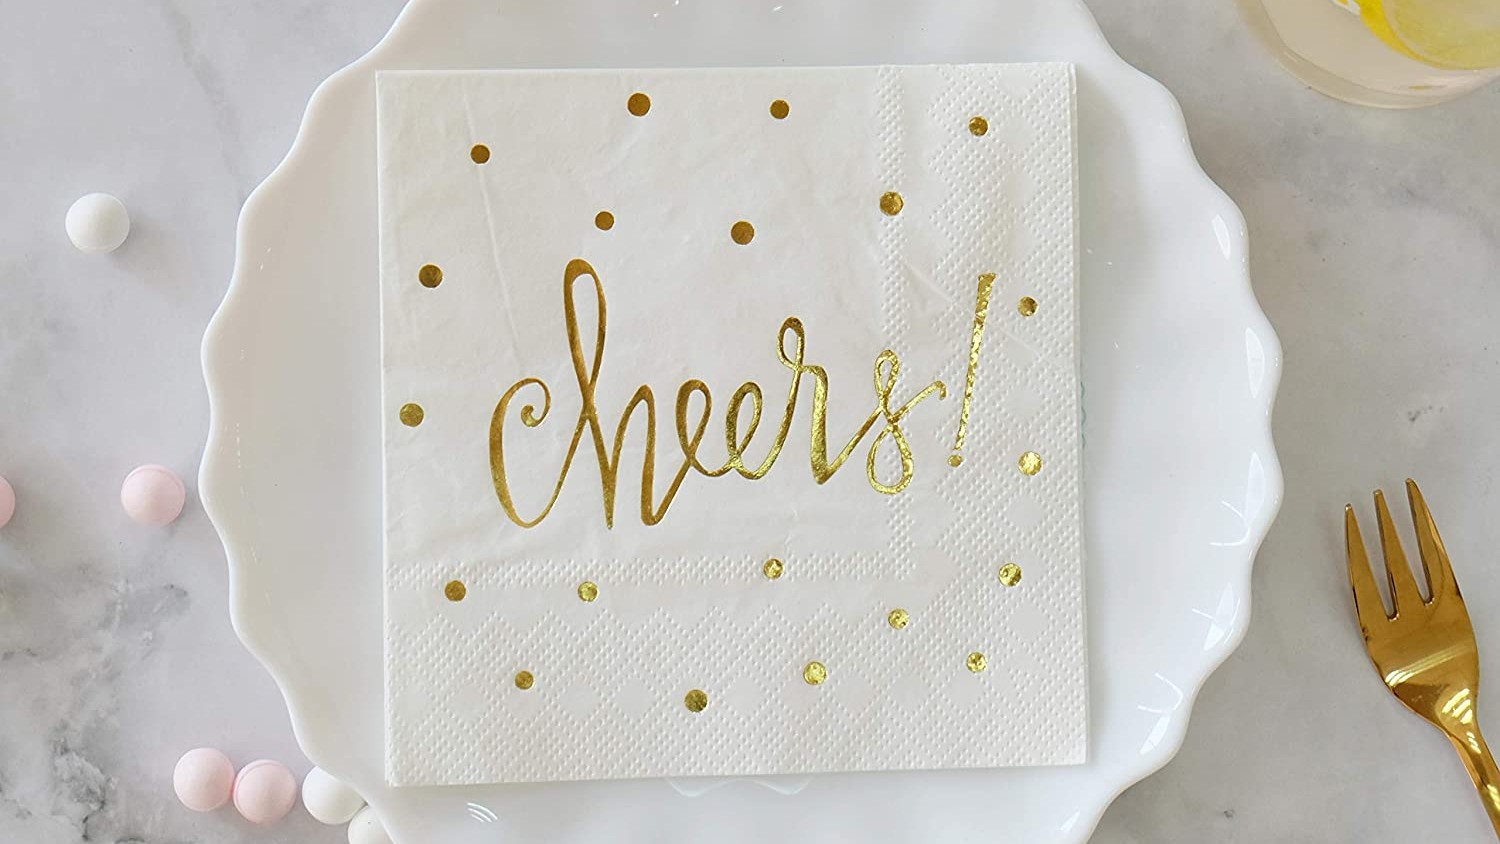 Decorative Gold Foil Napkins That Are Perfect for Your Next Party